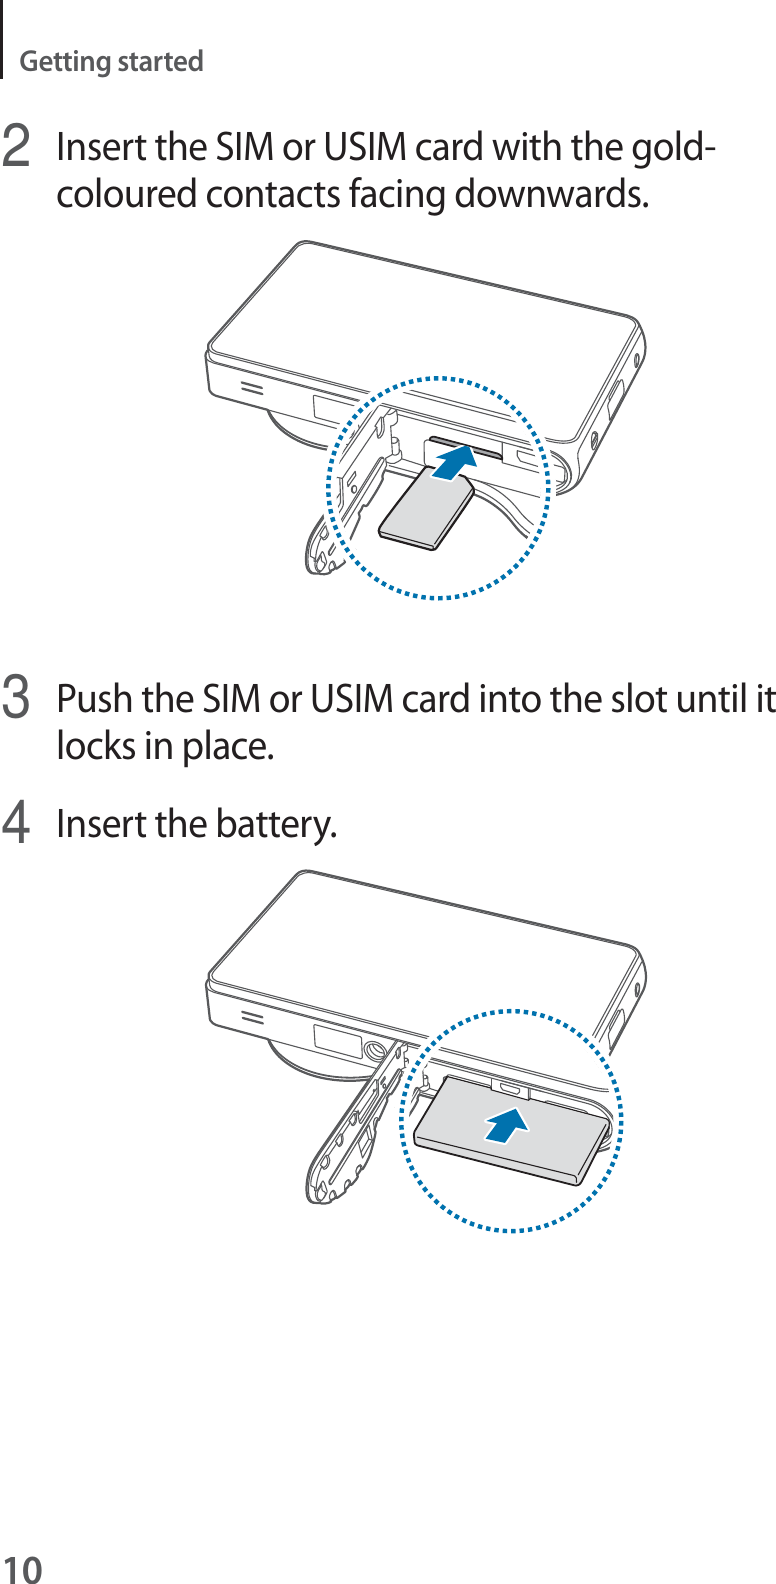 10Getting started2Insert the SIM or USIM card with the gold-coloured contacts facing downwards.3Push the SIM or USIM card into the slot until it locks in place.4Insert the battery.